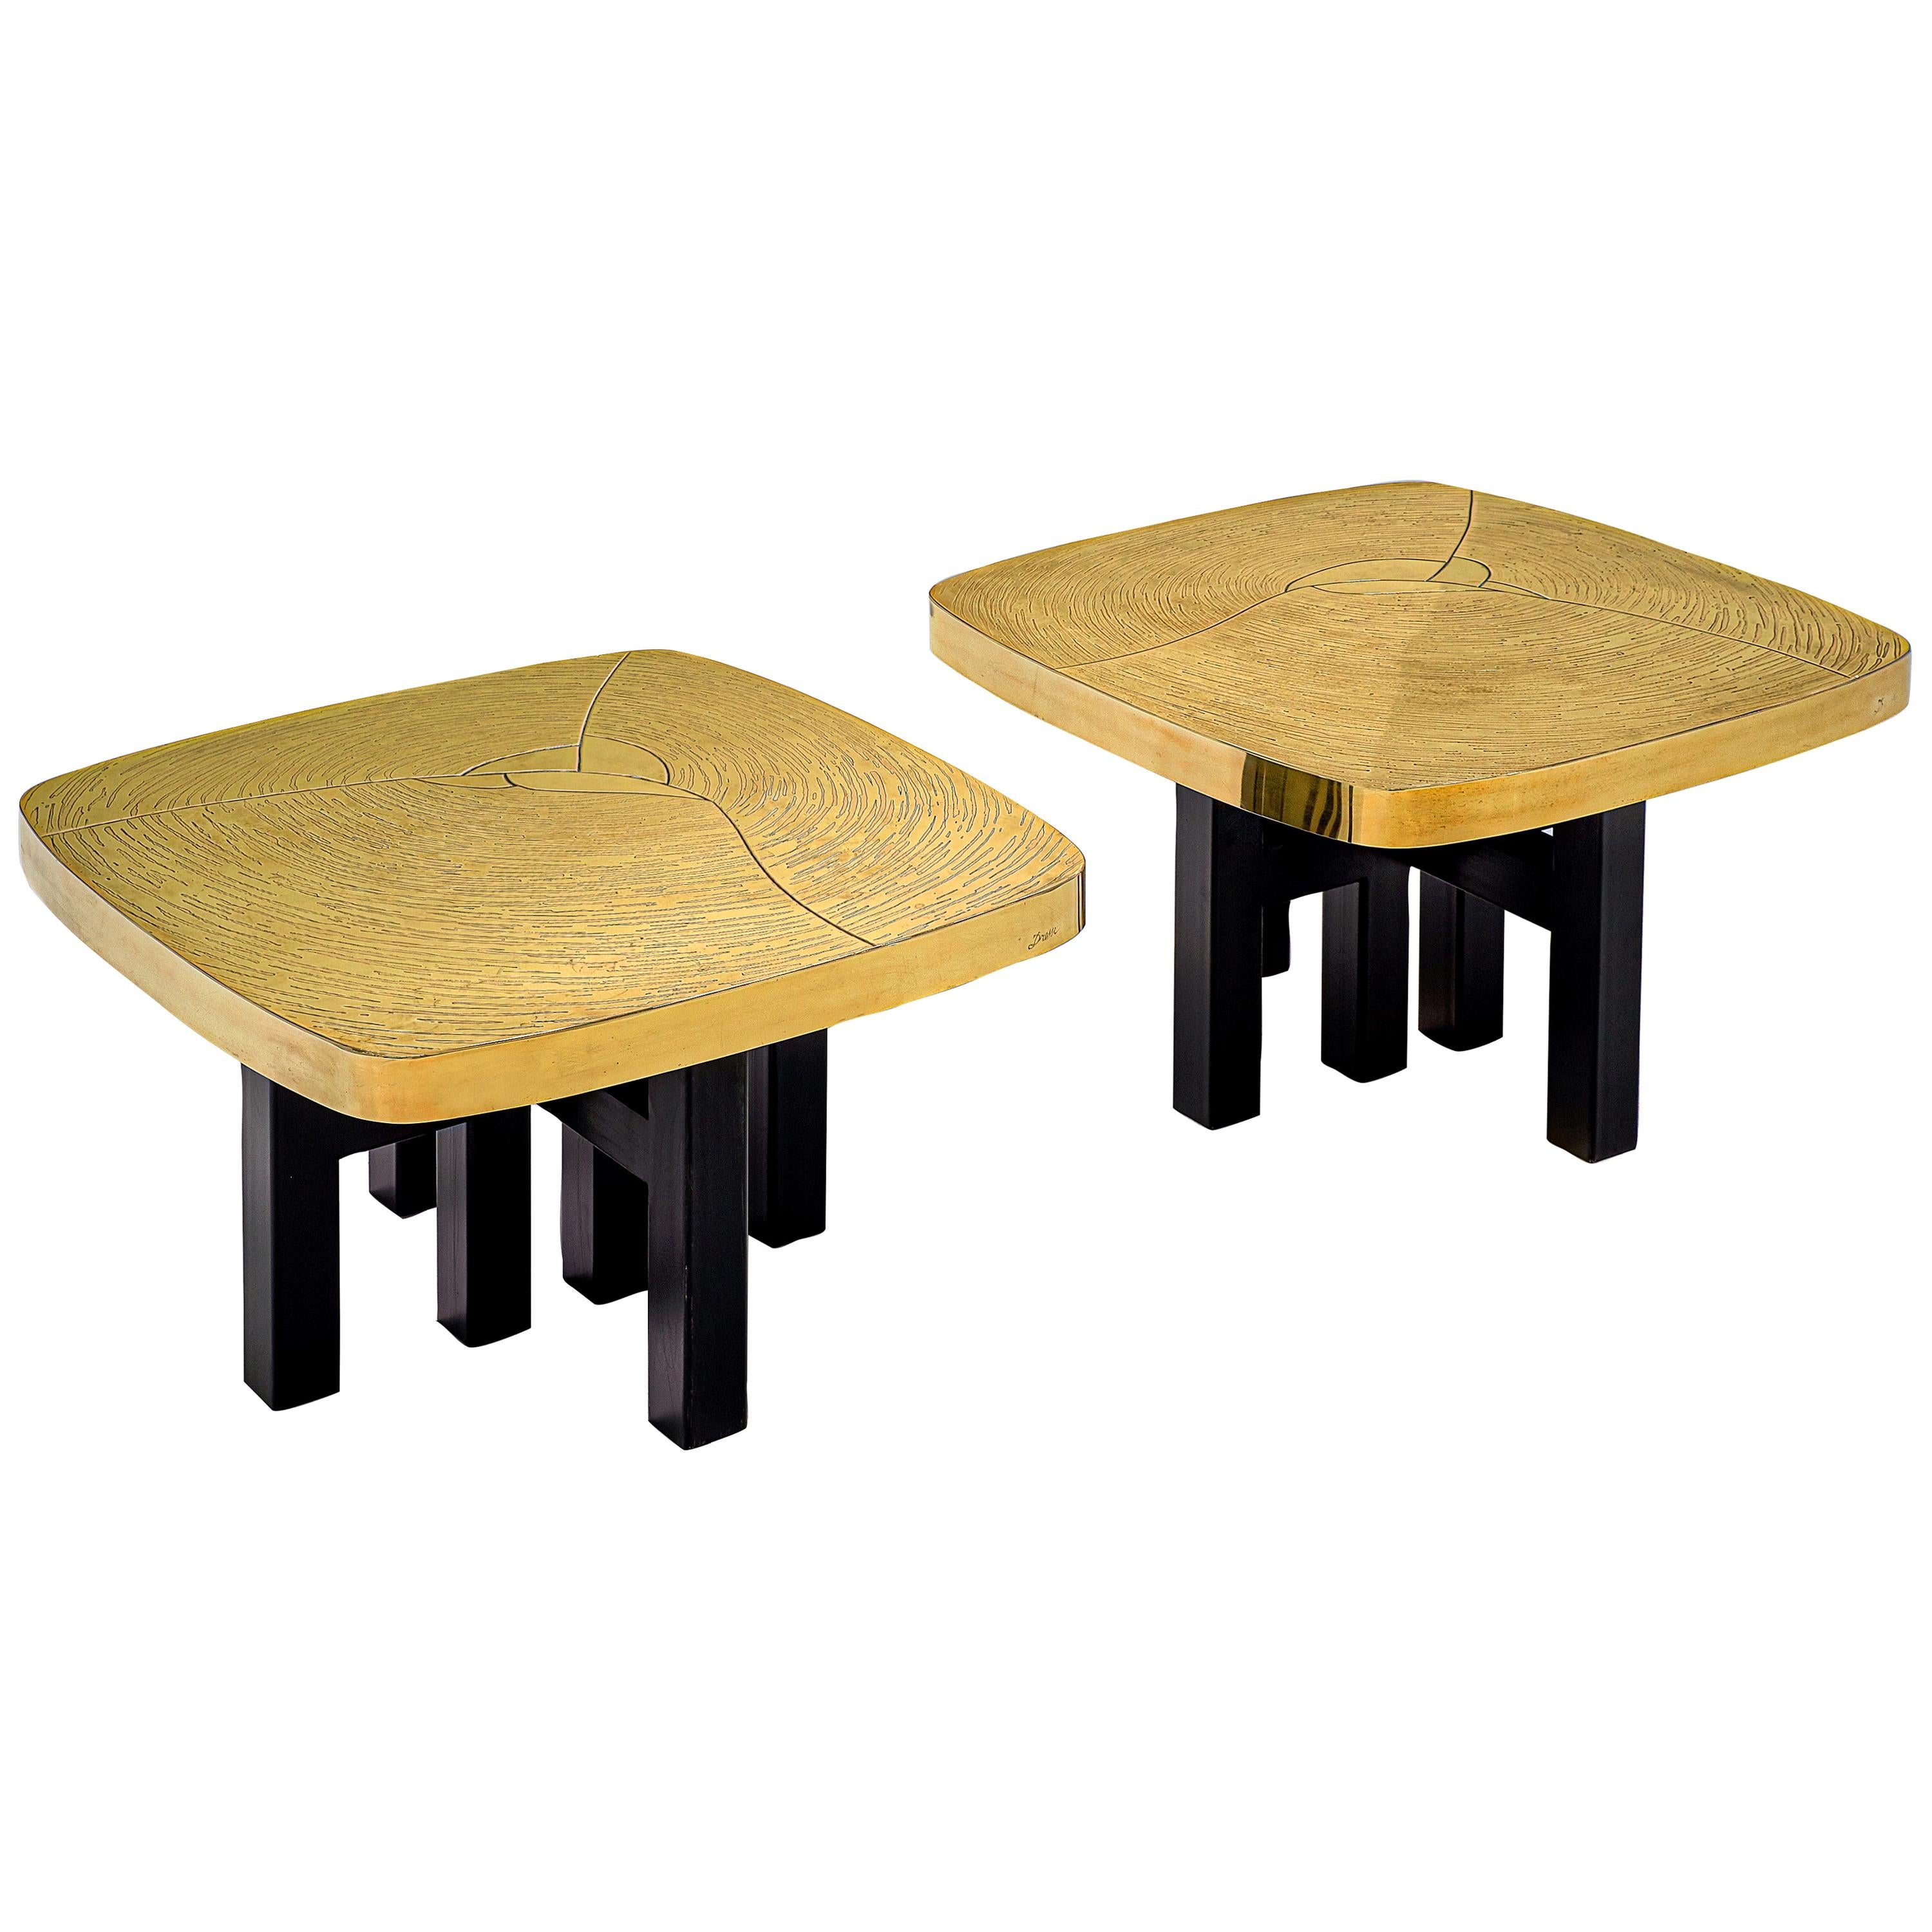 Jean Claude Dresse Pair of Side Tables in Brass